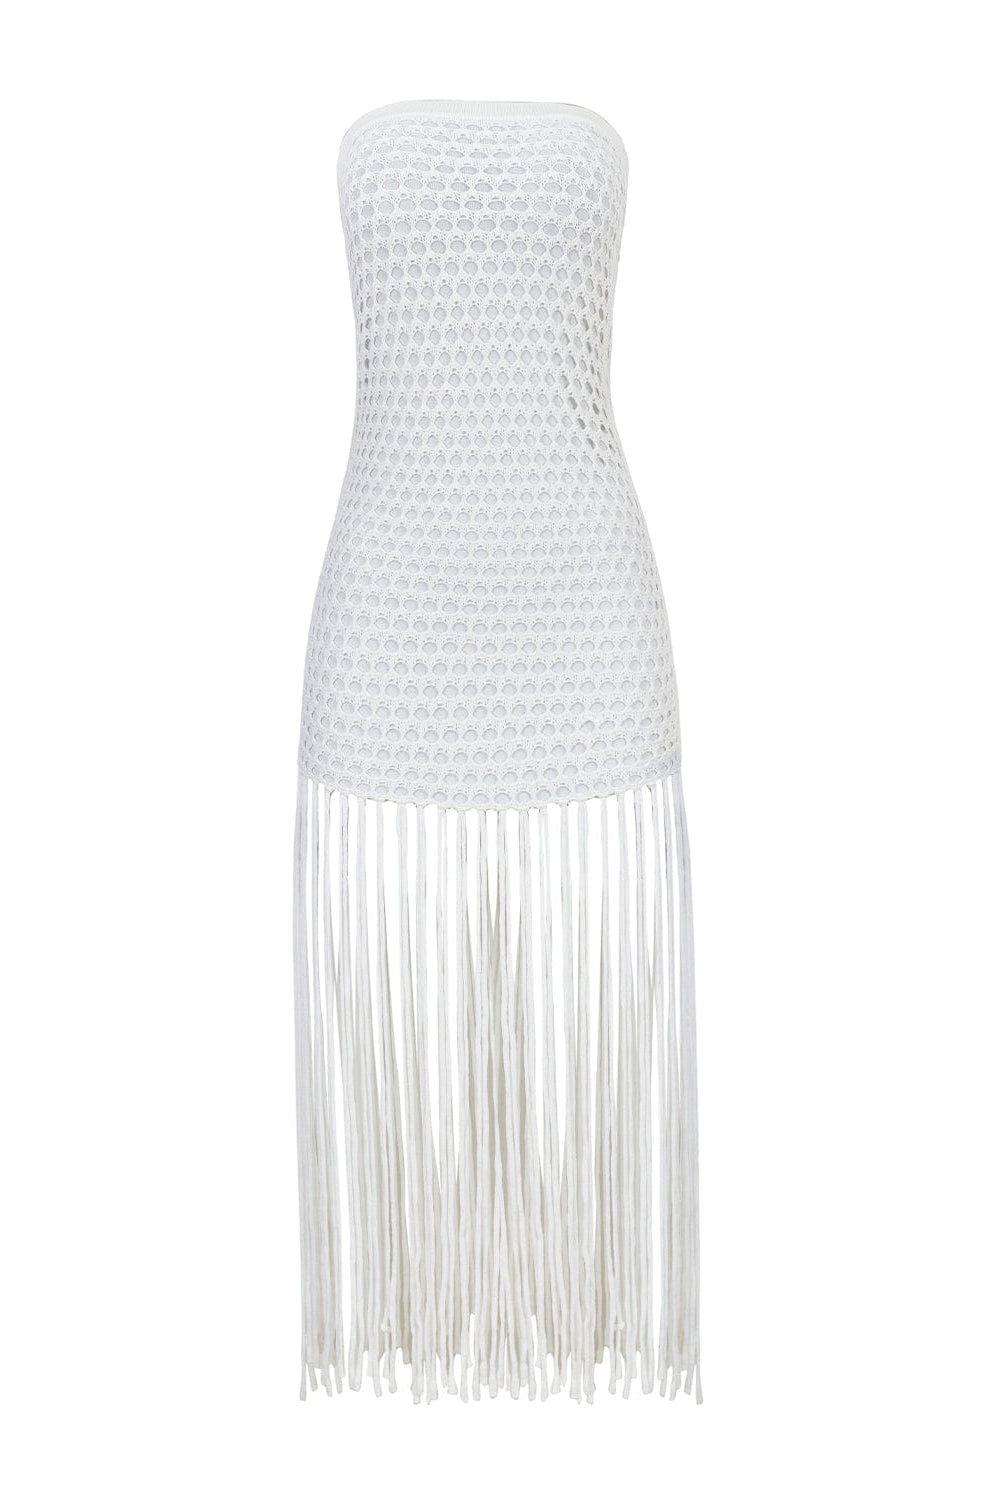 A white strapless fringe hem dress with macramé details. Featured against a white wall background.